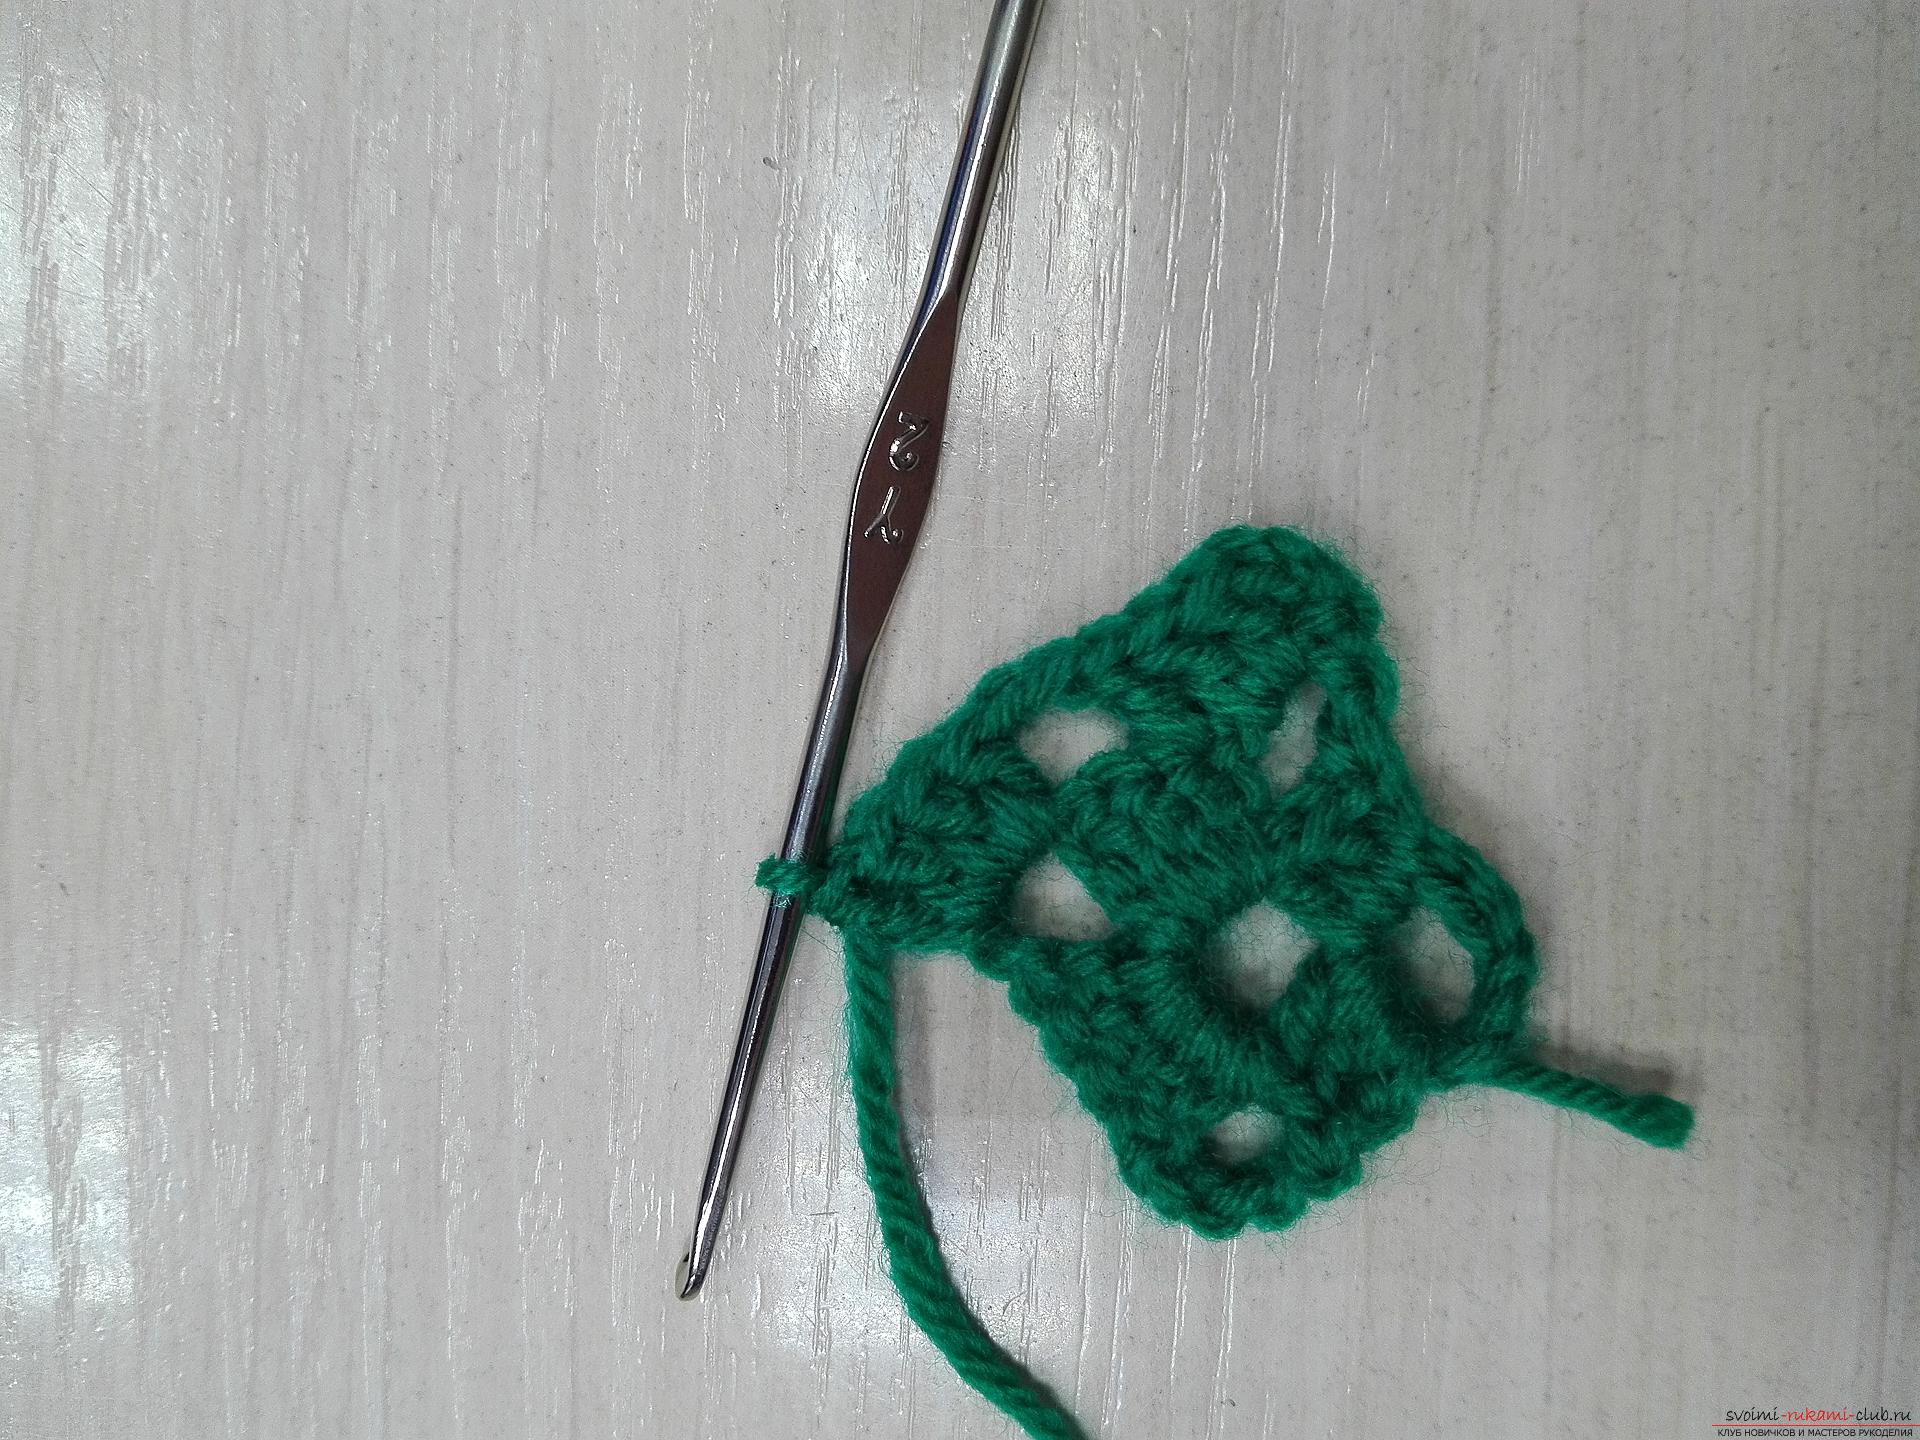 This master class on knitting is designed by the lover - he will teach how to tie the heart crochet. Photo №5